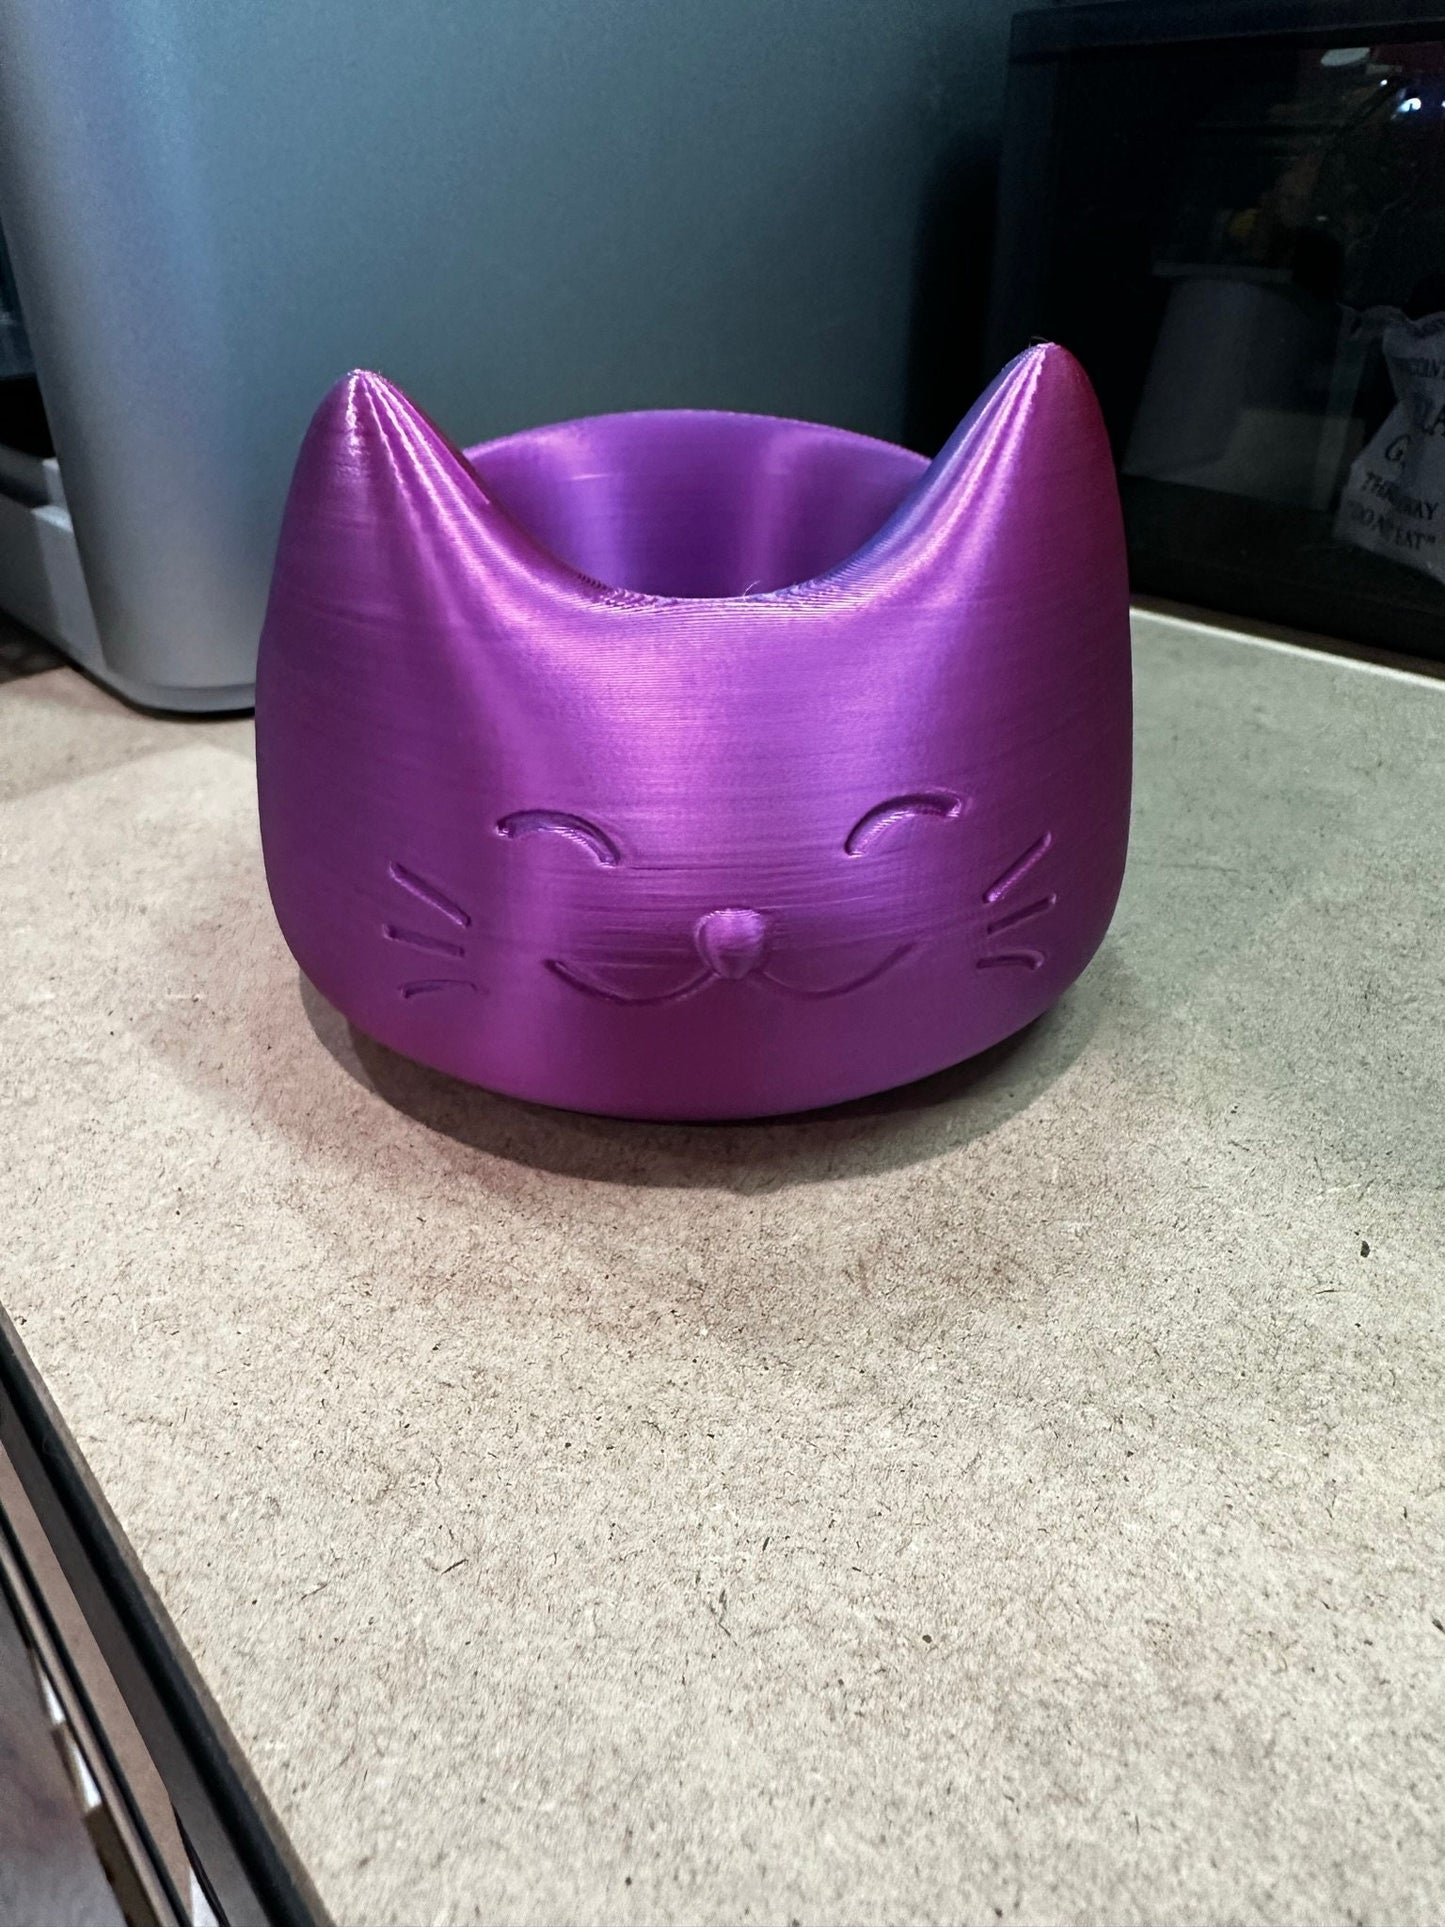 3D Printed Cat Face Bowl Great For Holding Candy or For Holding Household Items